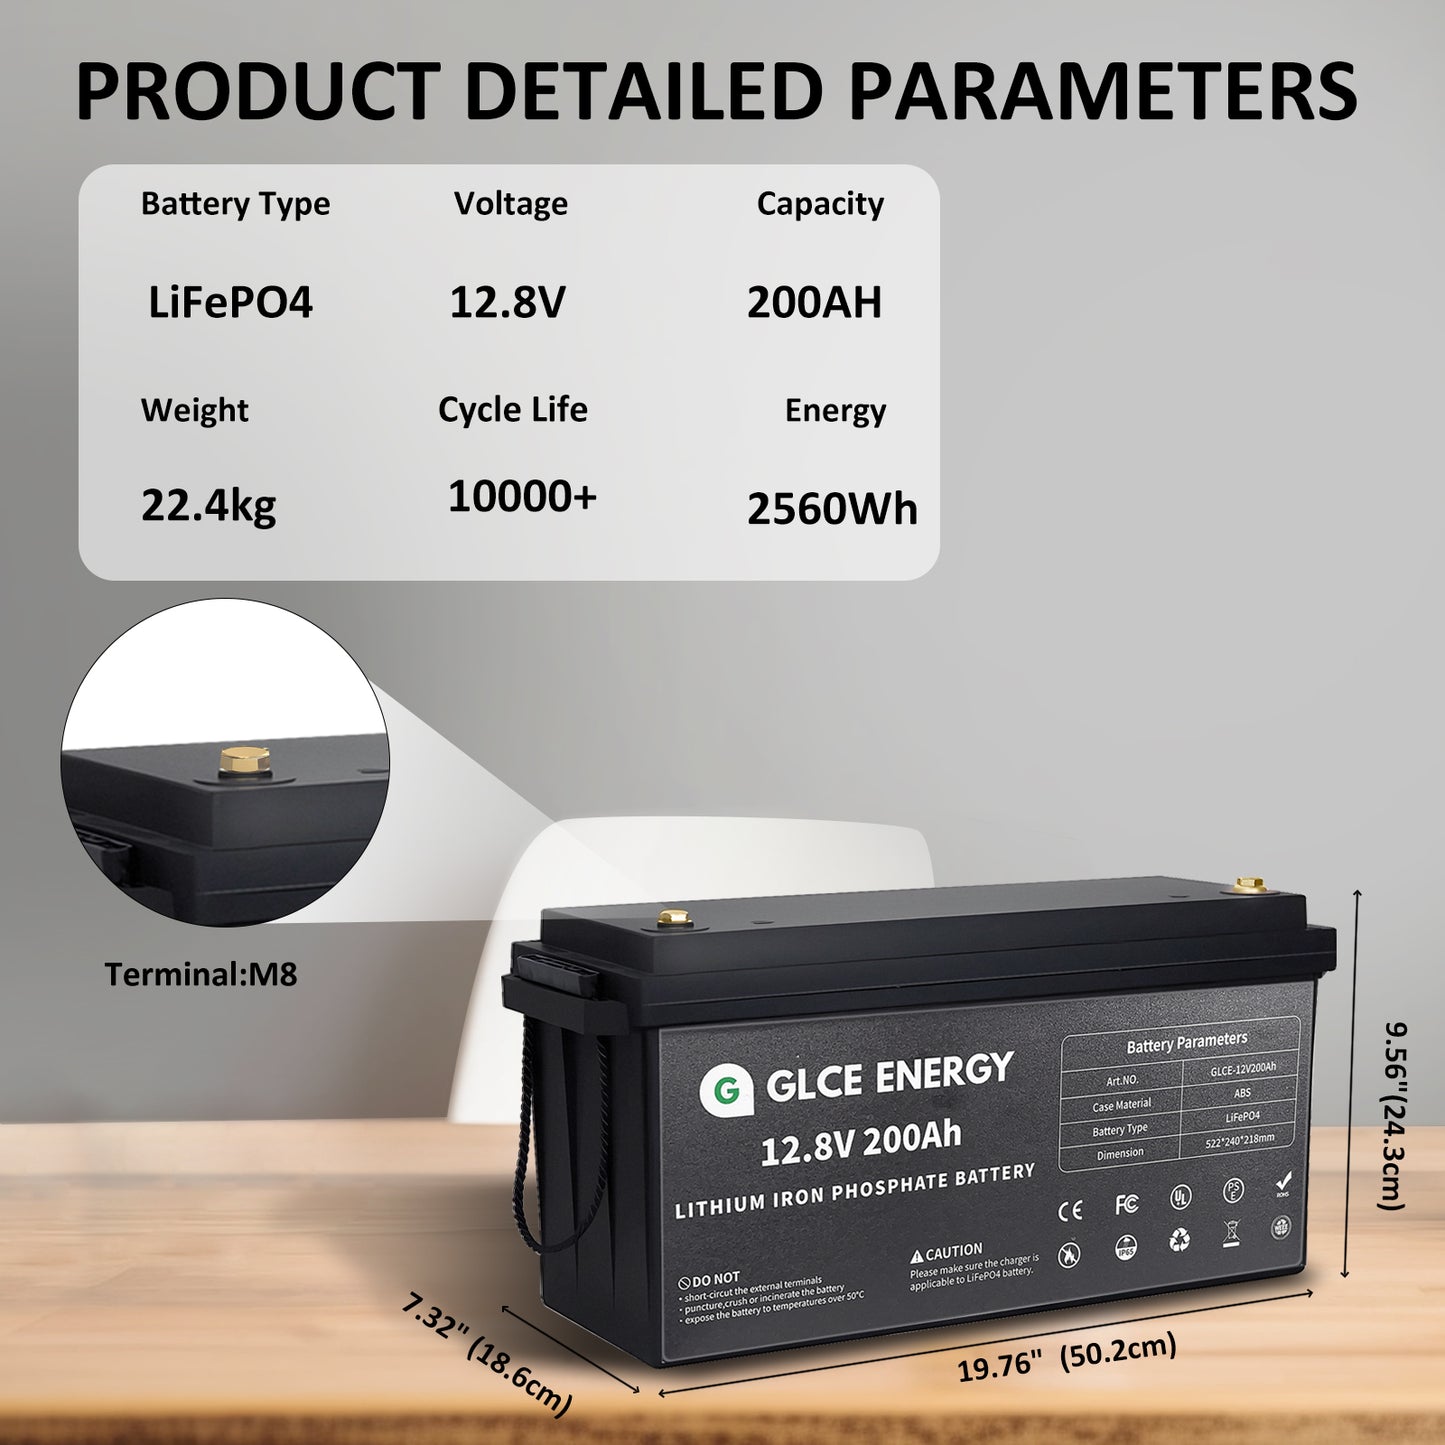 12.8v 200Ah Lithium Iron Phosphate Battery Detailed